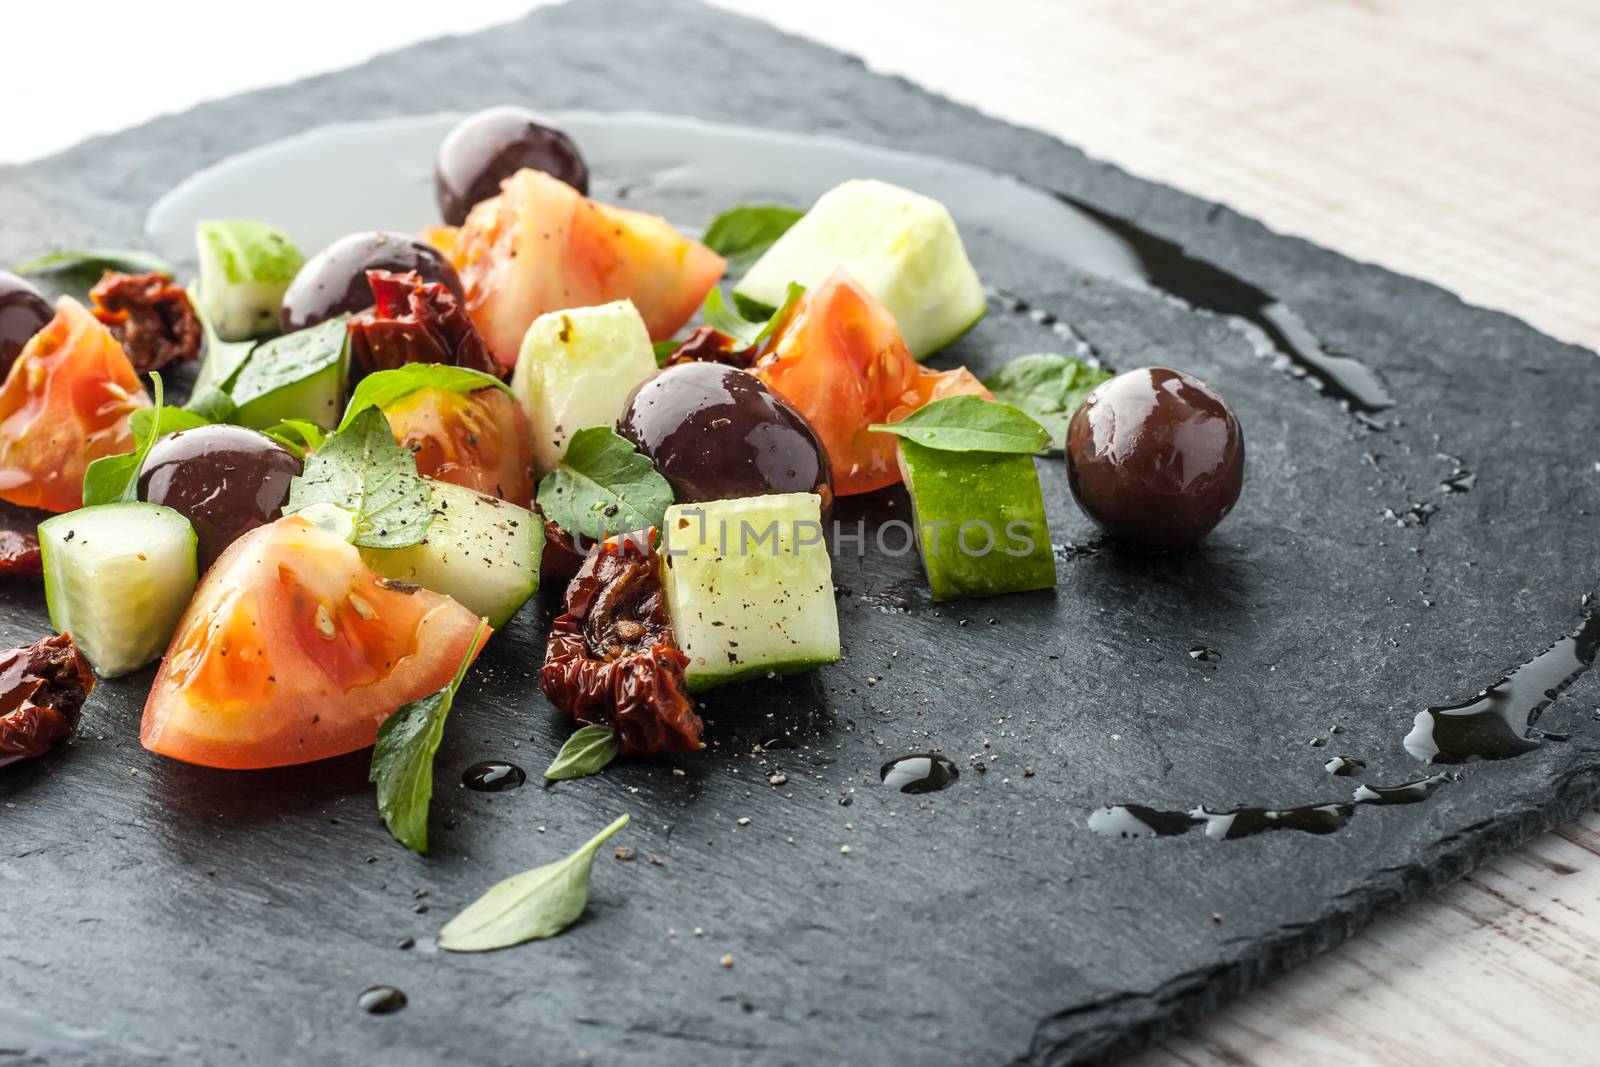 Salad with fresh and dried tomato and olives on the black stone close-up